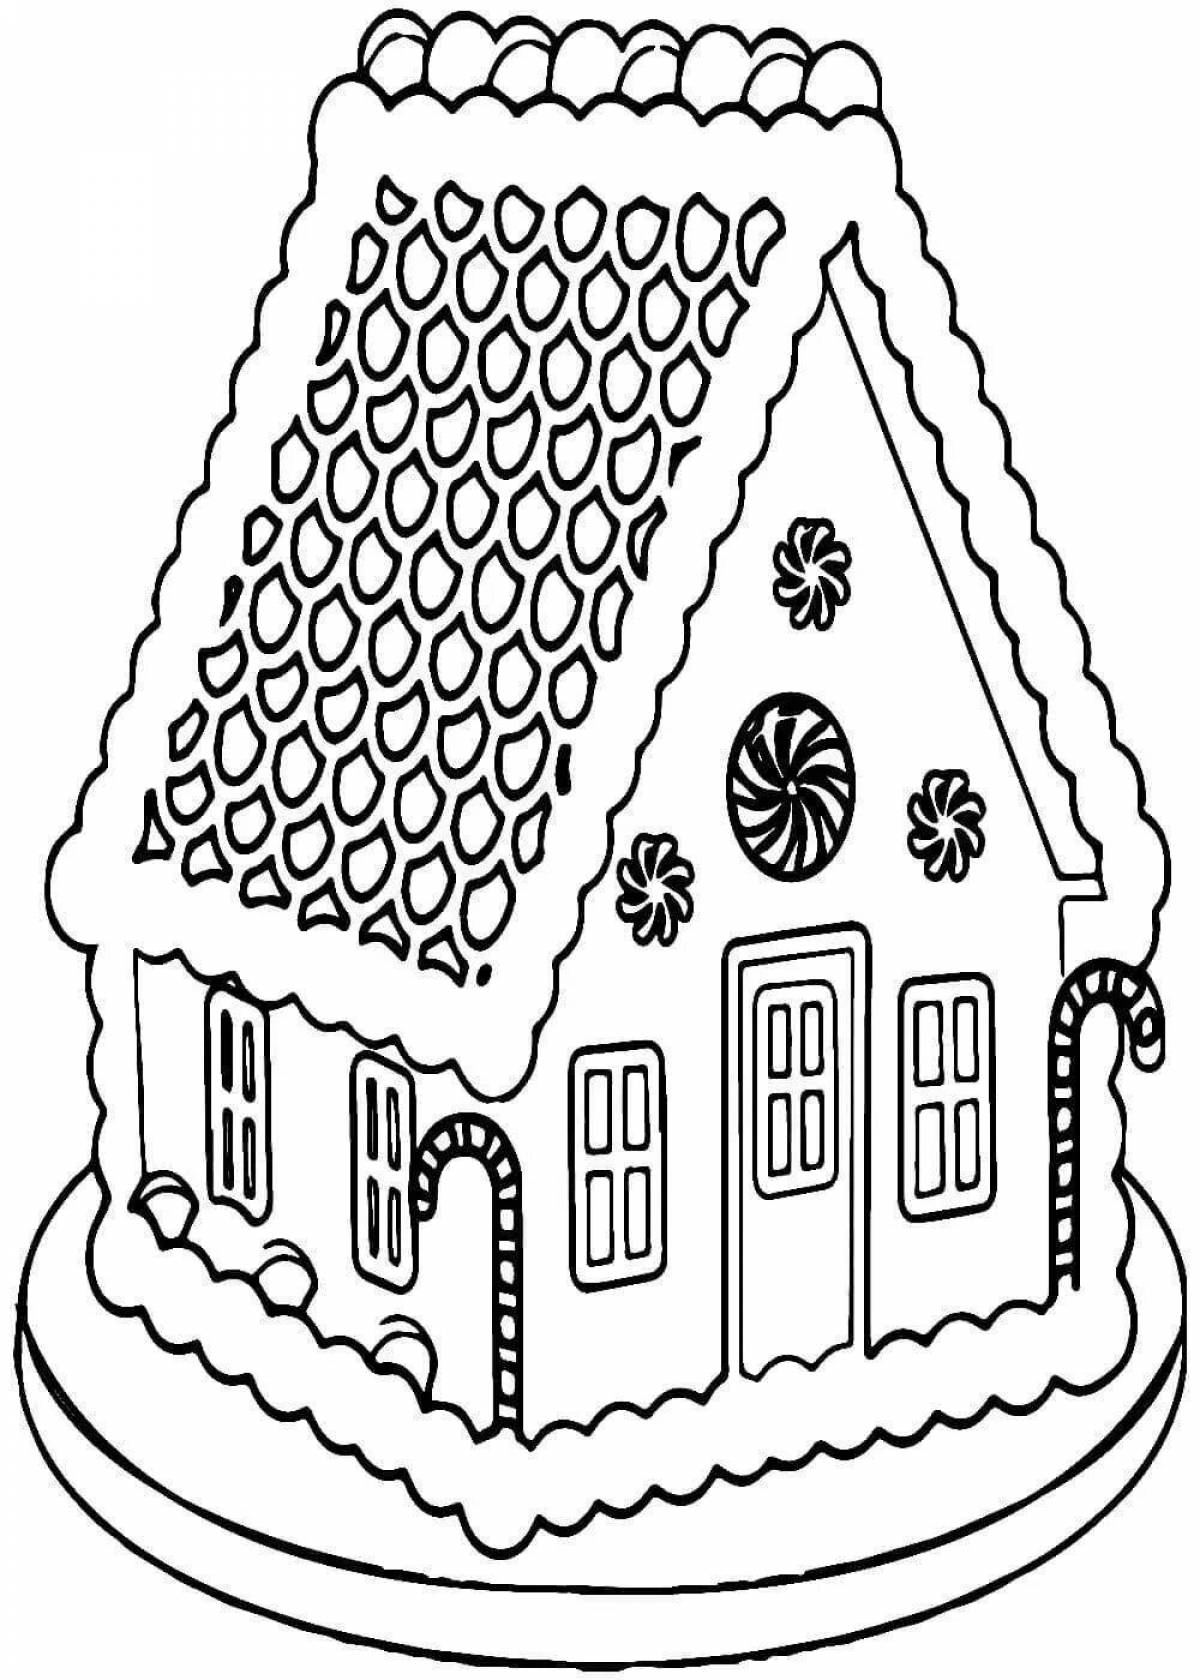 Amazing Christmas gingerbread house coloring book